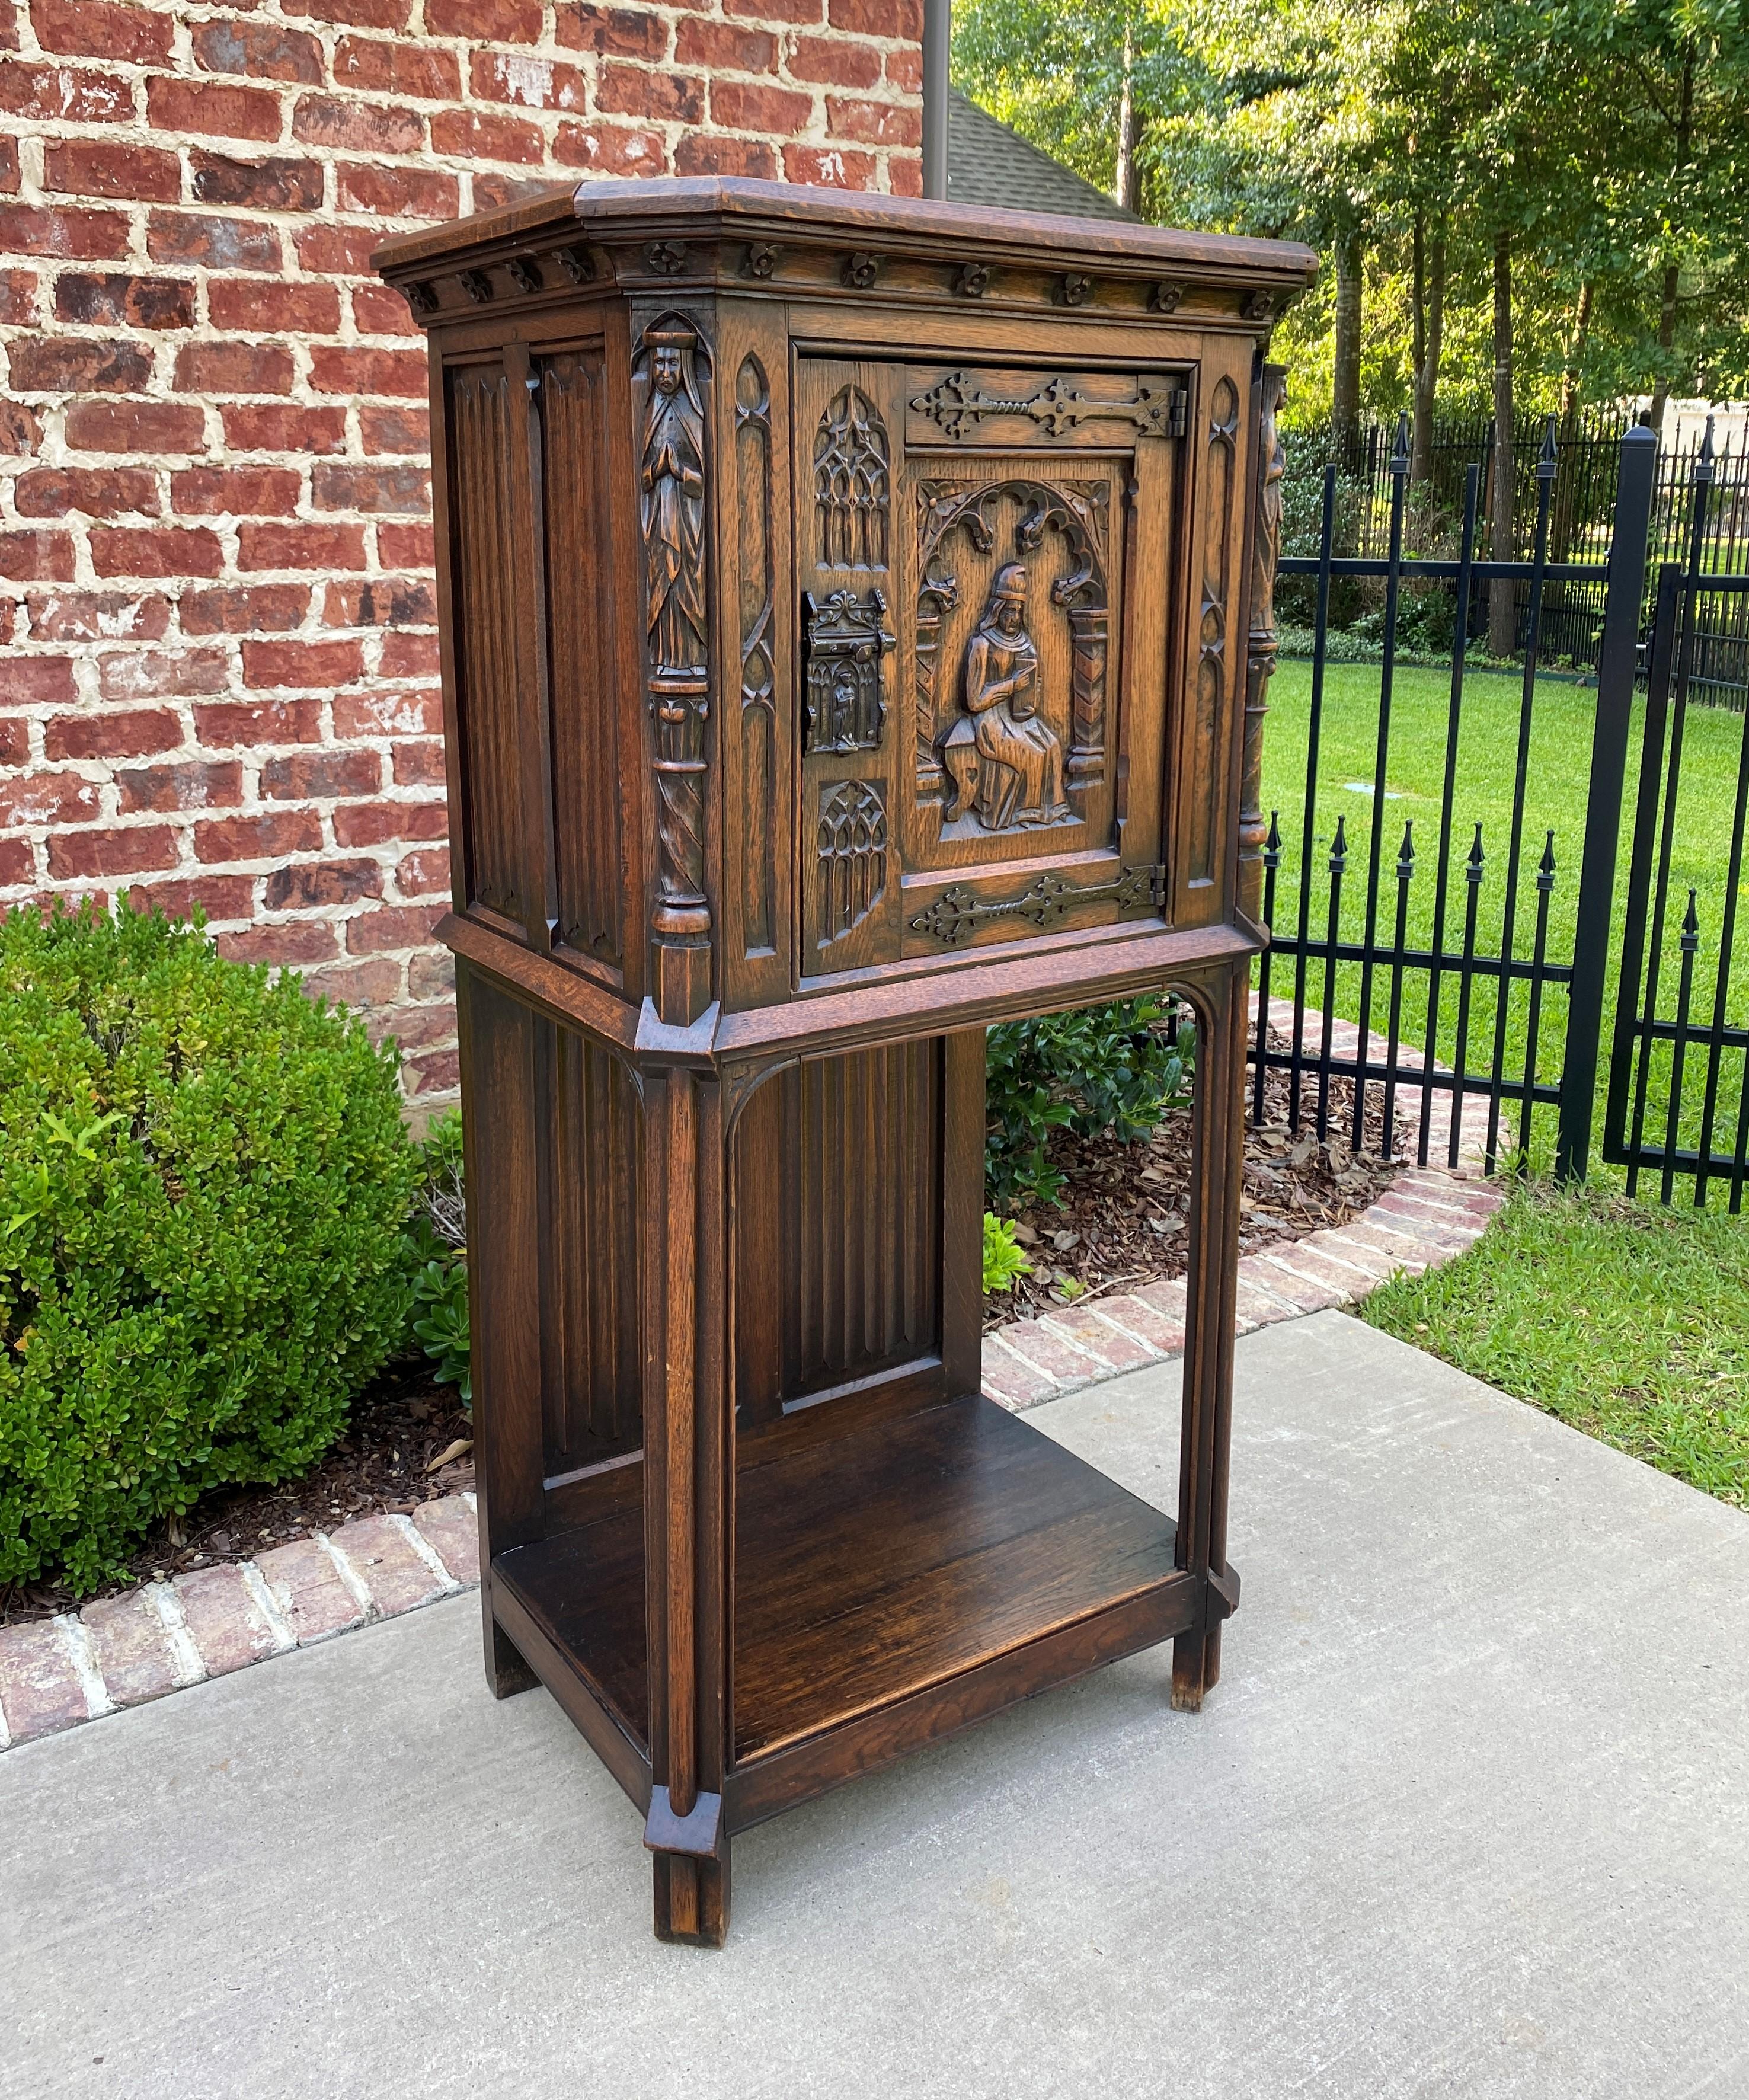 Antique French Carved Oak Gothic Sacristy Vestry Altar Wine bar cabinet~~c. 1880s 

In 18th and 19th century Europe, sacristy or vestment cabinets were used to store liturgical garments, robes, wine and other articles associated primarily with the